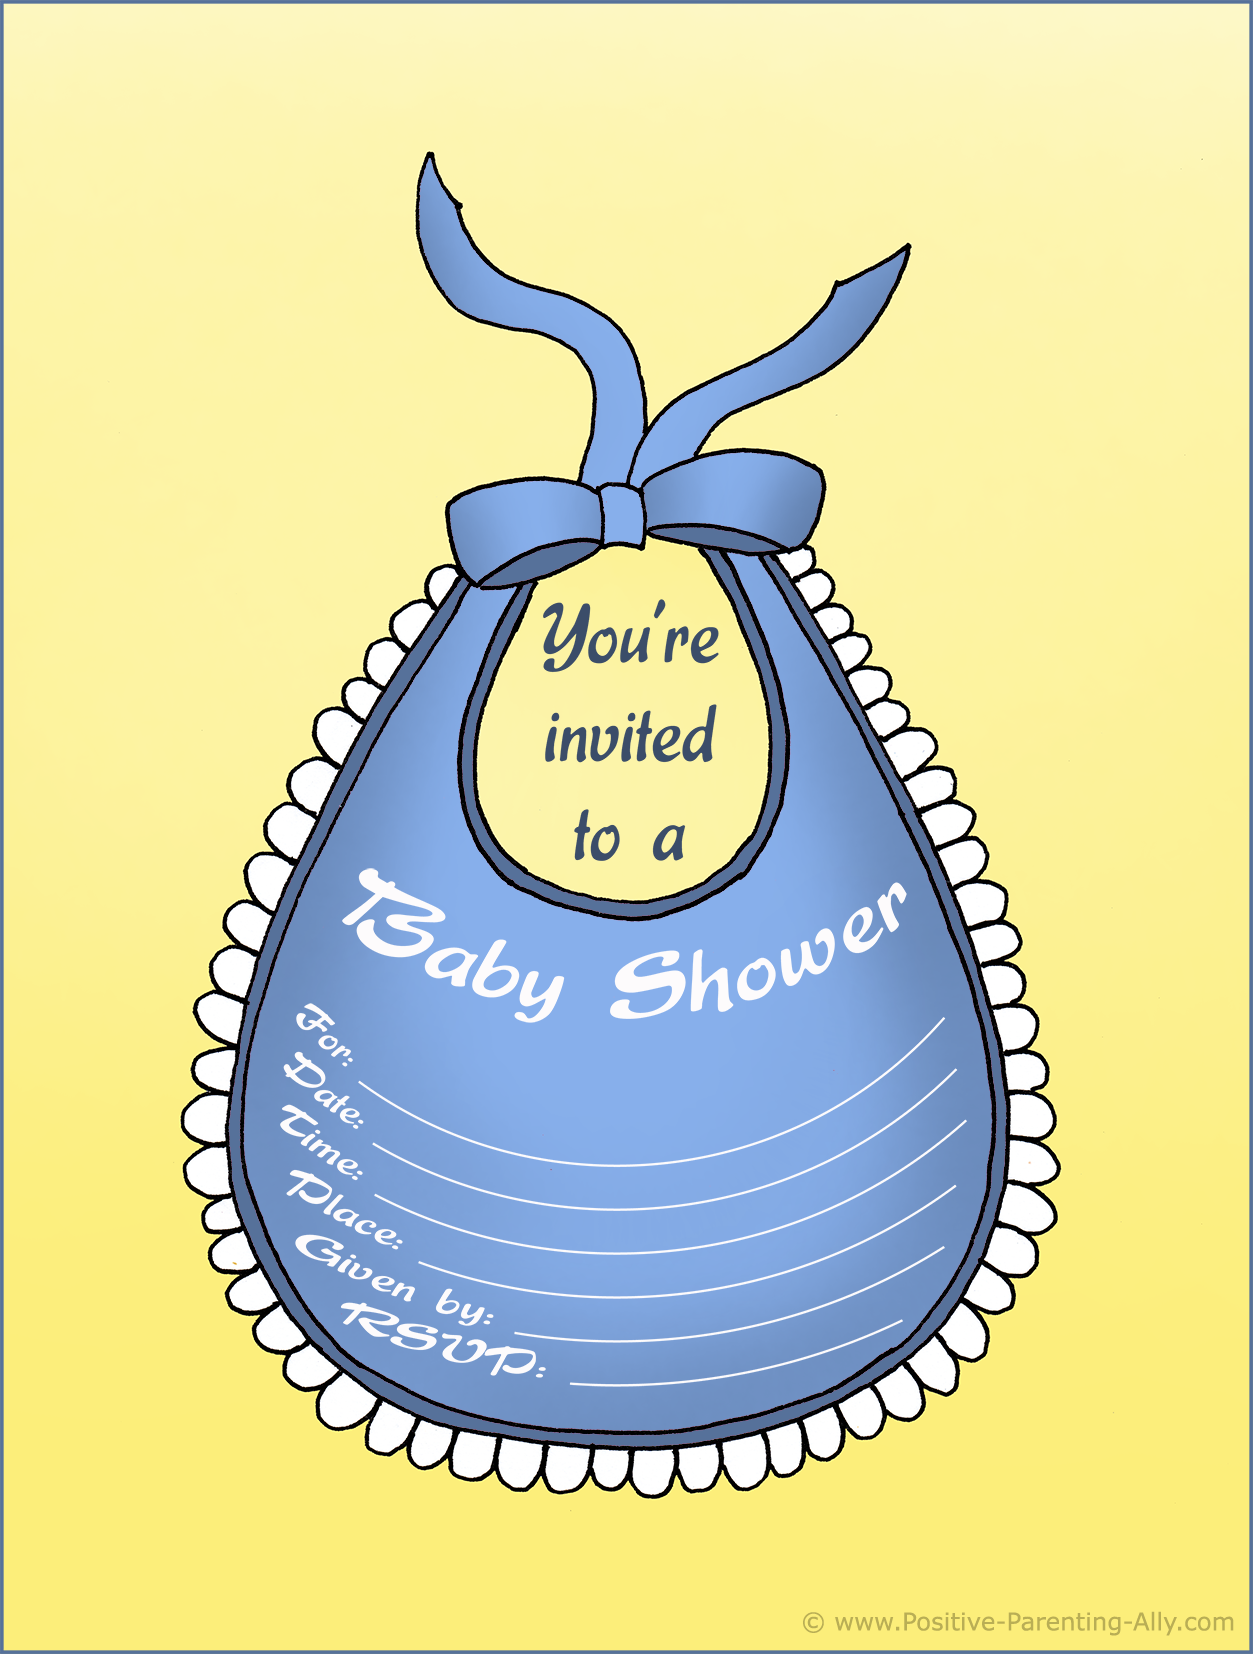 free-printable-baby-shower-invitations-in-high-quality-resolution